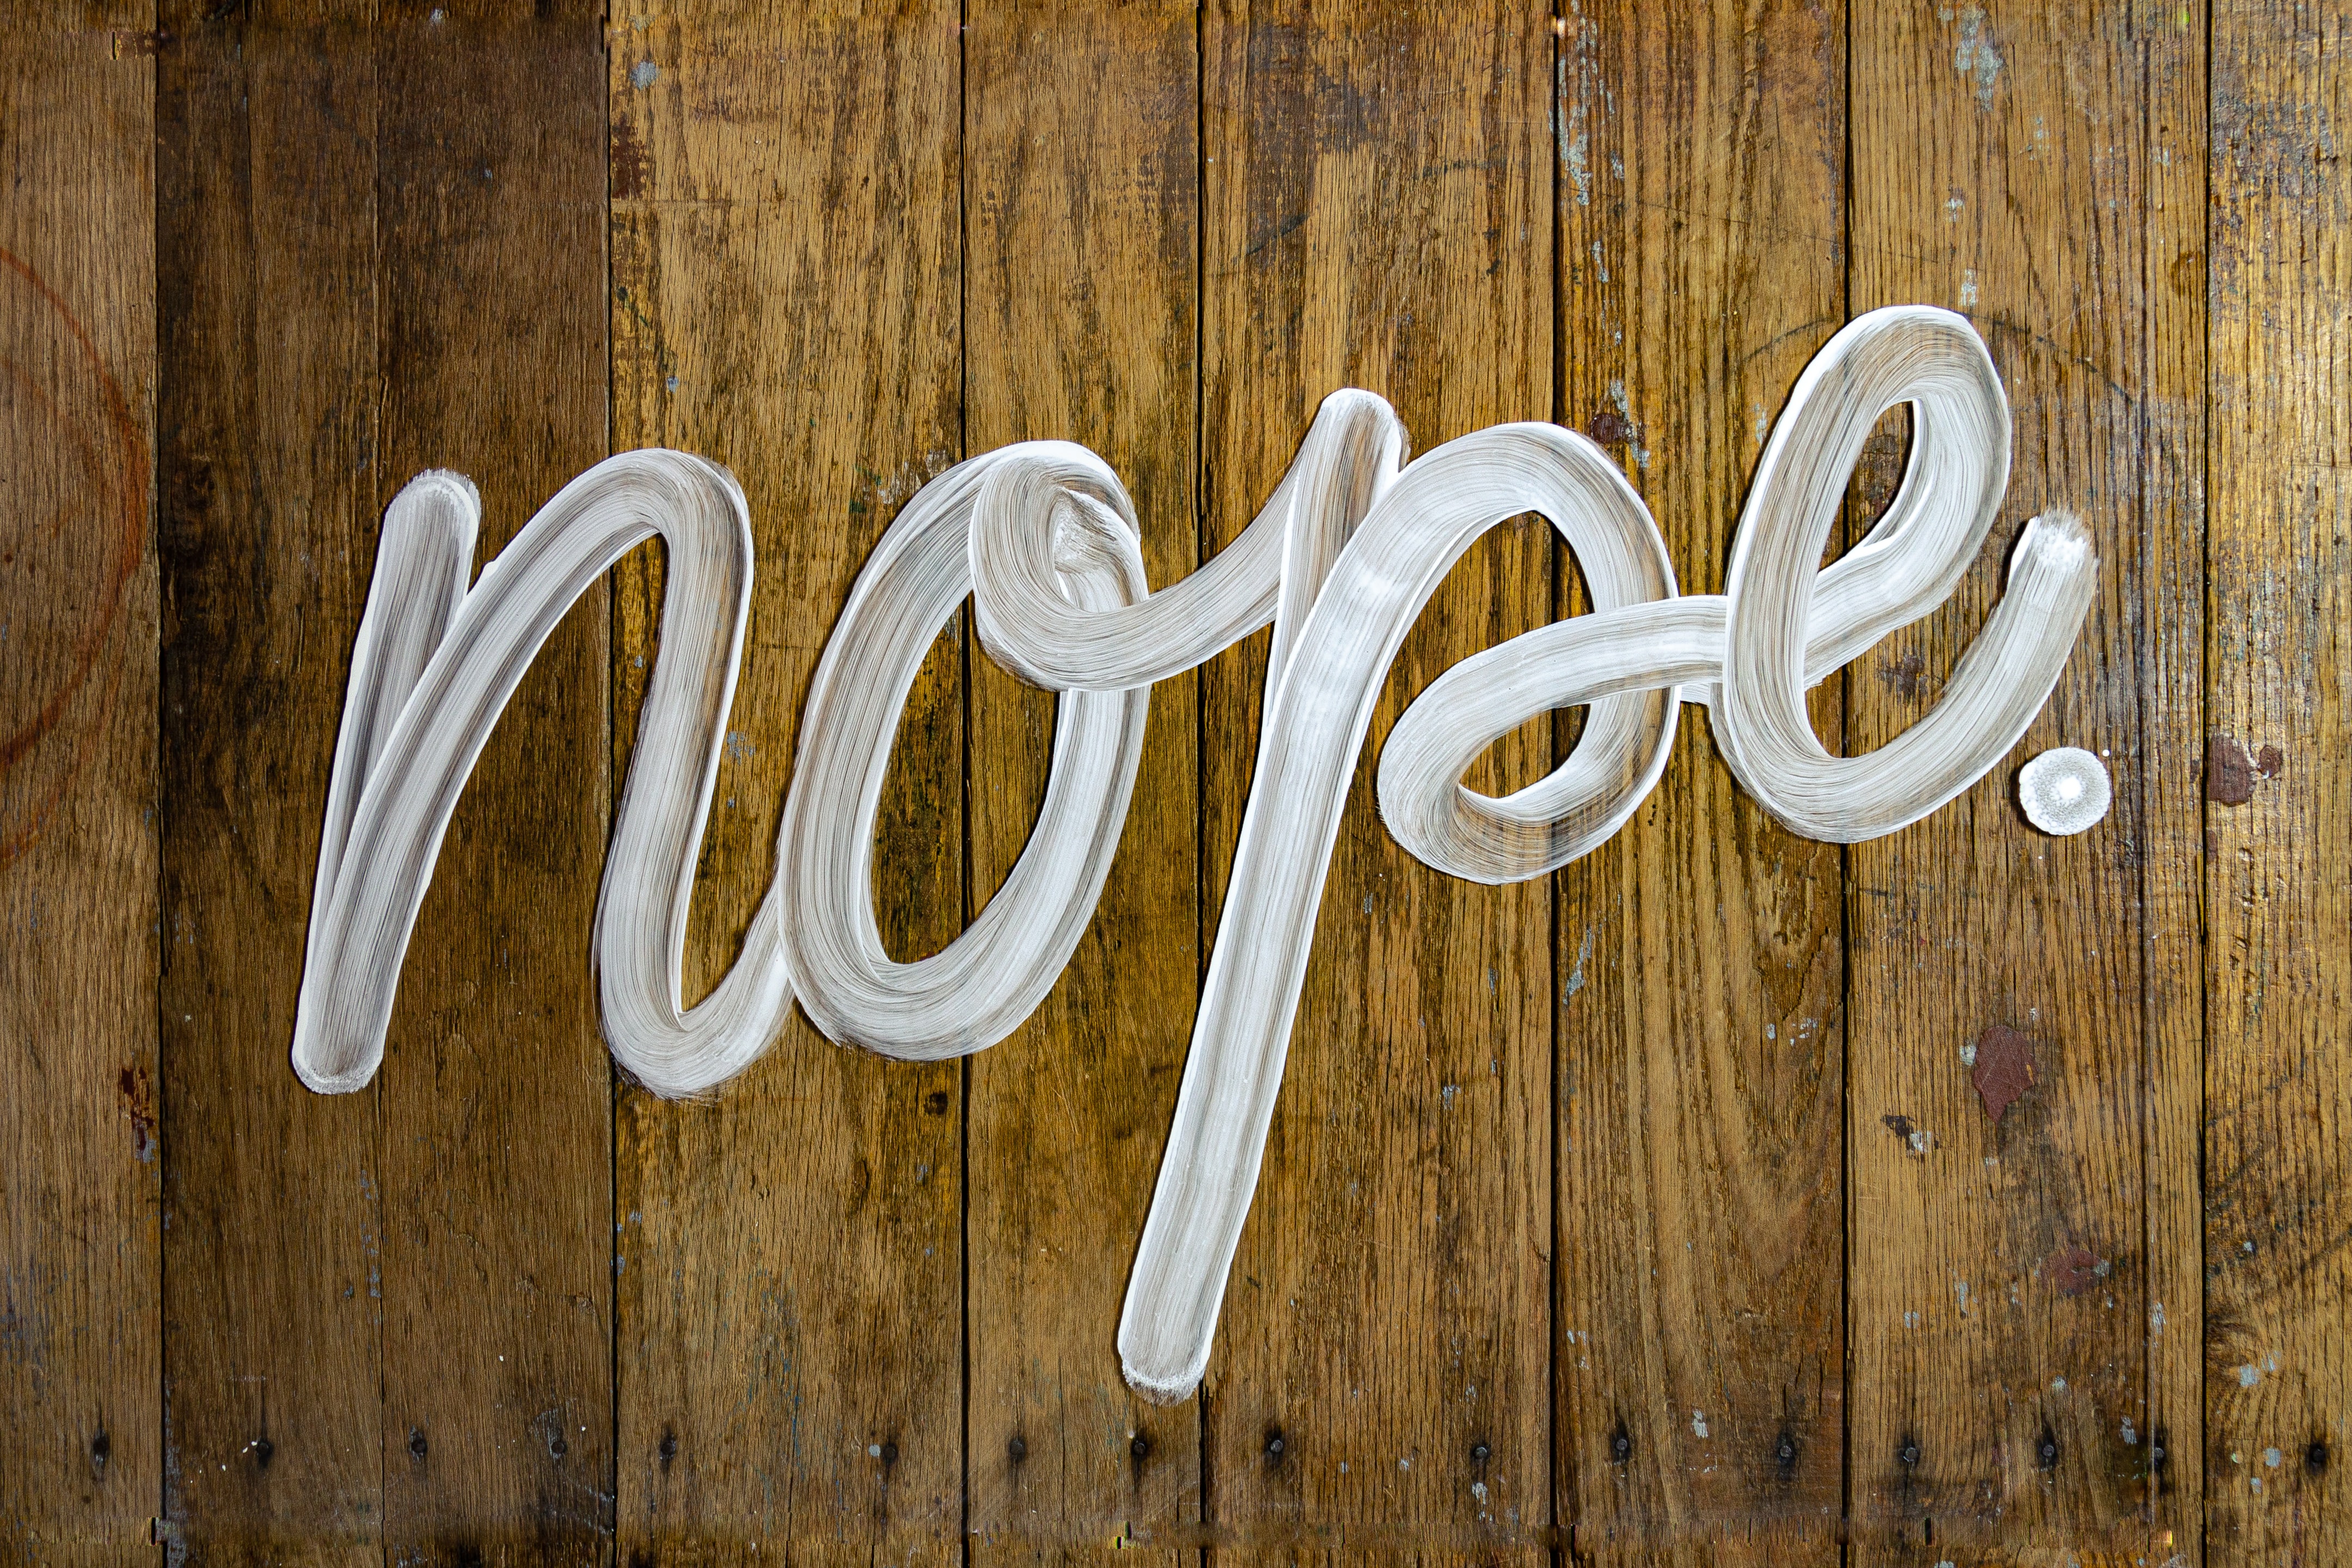 "Nope" written in white on a brown wood wall.